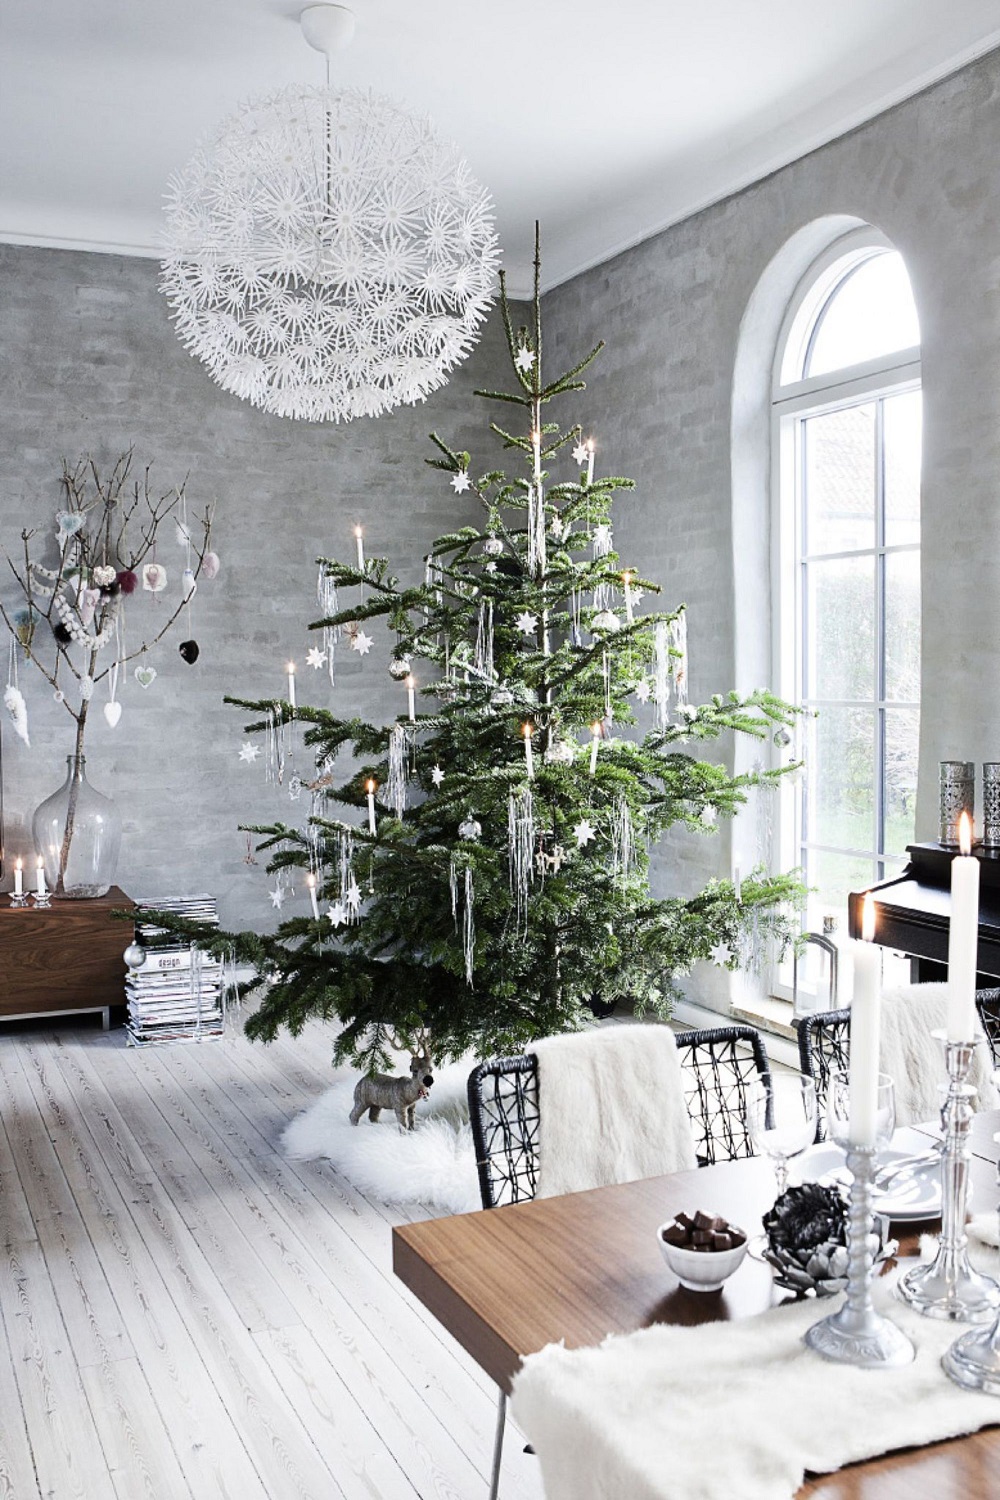 t4-8 Modern Christmas decorations ideas that are heartwarming